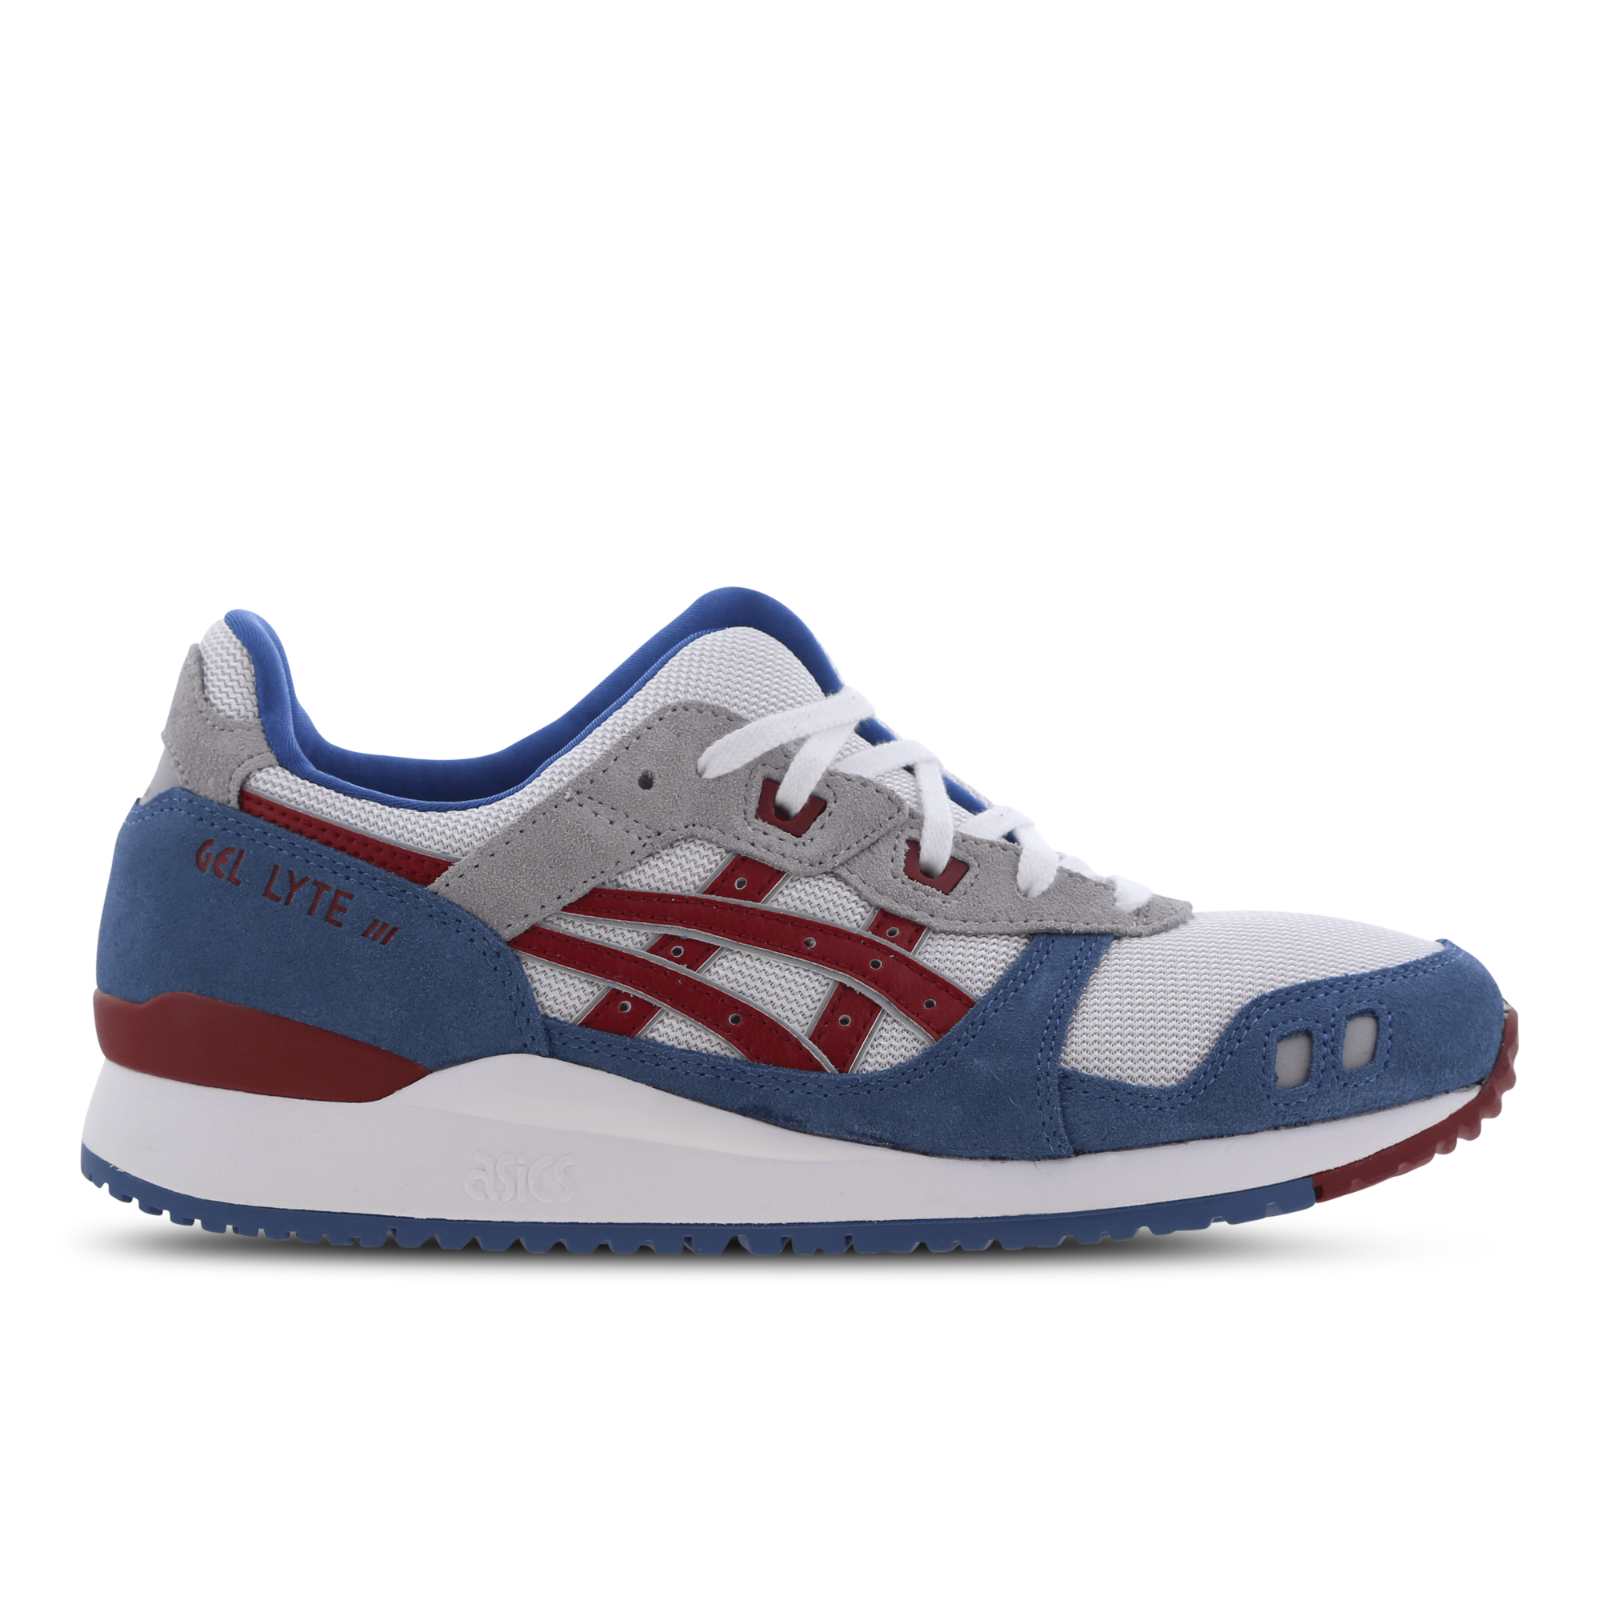 Asics gel-lyte iii men shoes comfort blue and red